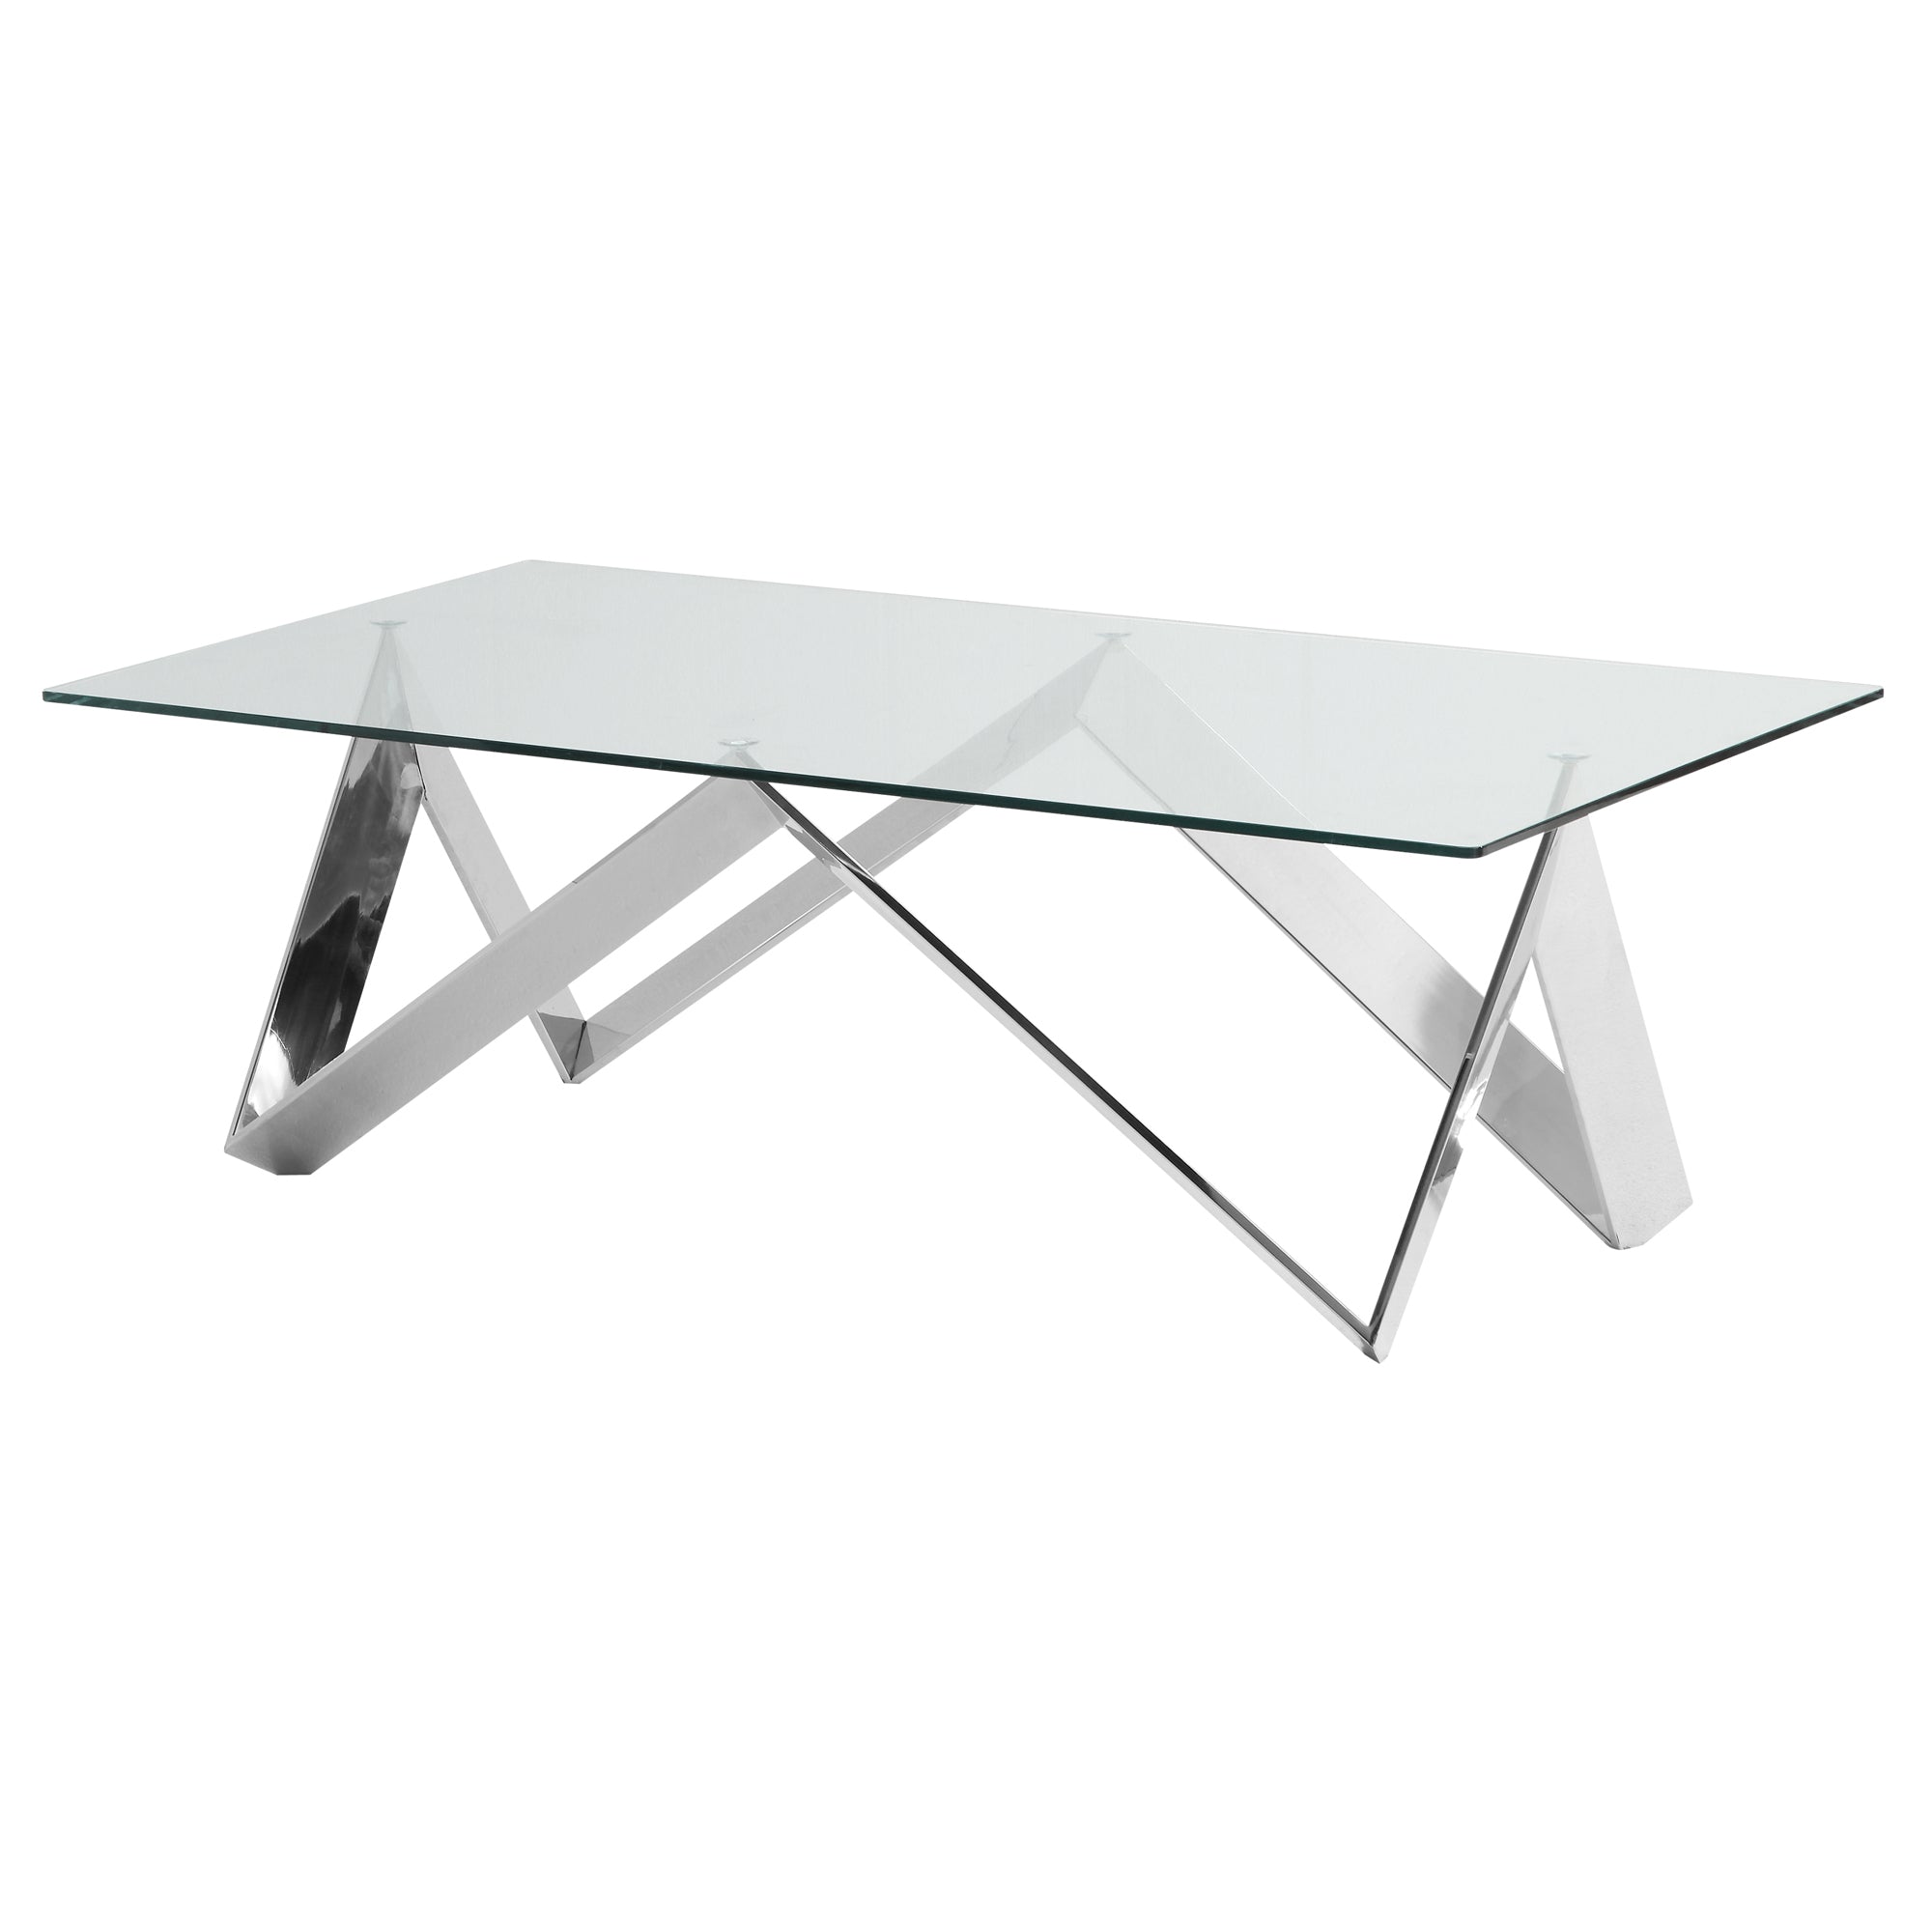 Armen Living Lcsccoglpl Scarlett Contemporary Rectangular Coffee Table In Polished Steel Finish With Tempered Glass Top